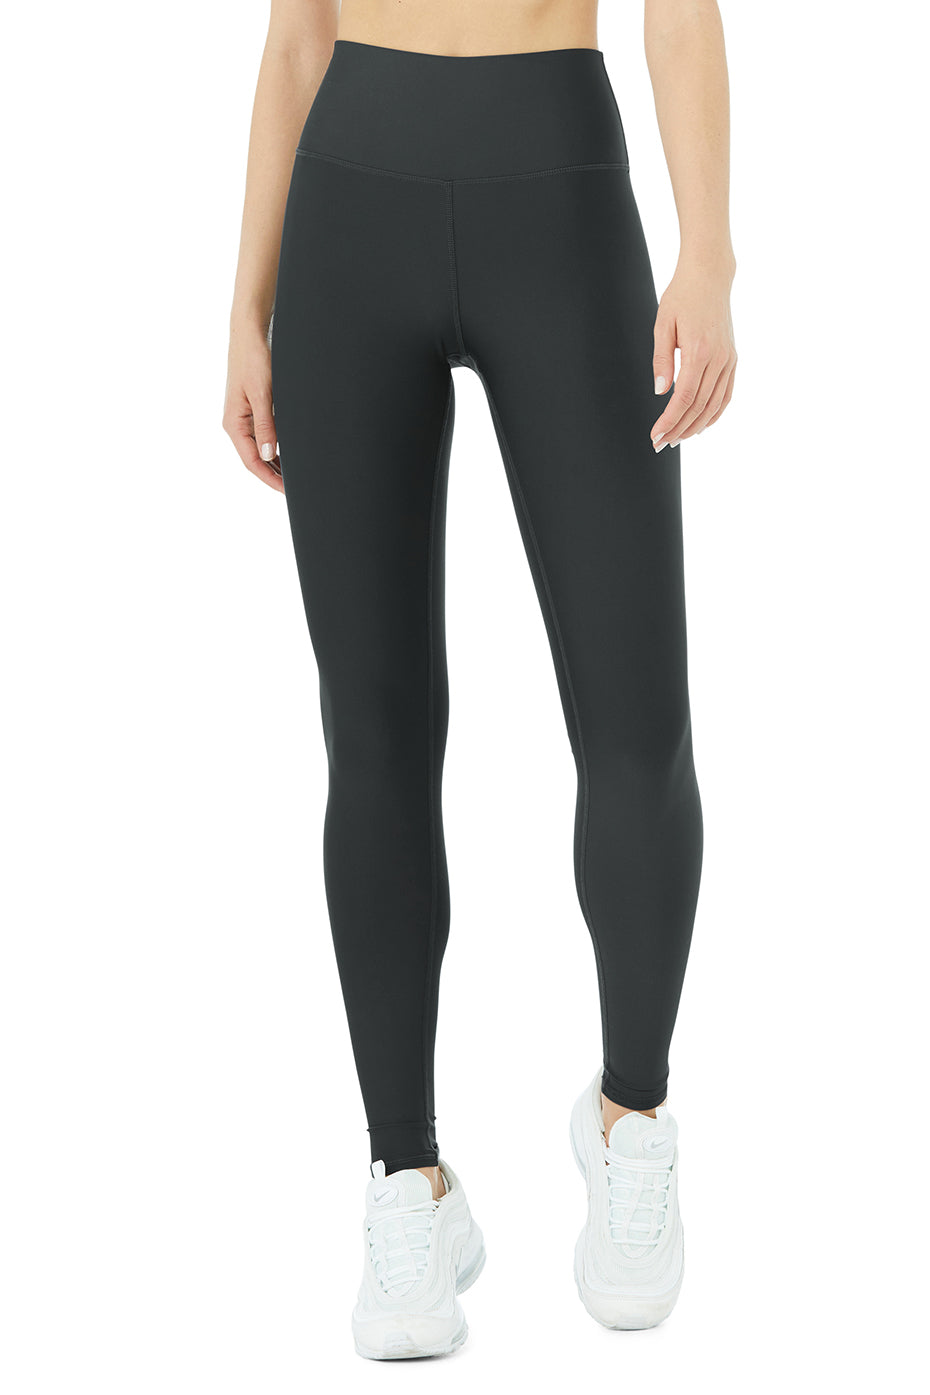 High-Waist Airlift Legging in Anthracite Stone by Alo Yoga - Work Well Daily